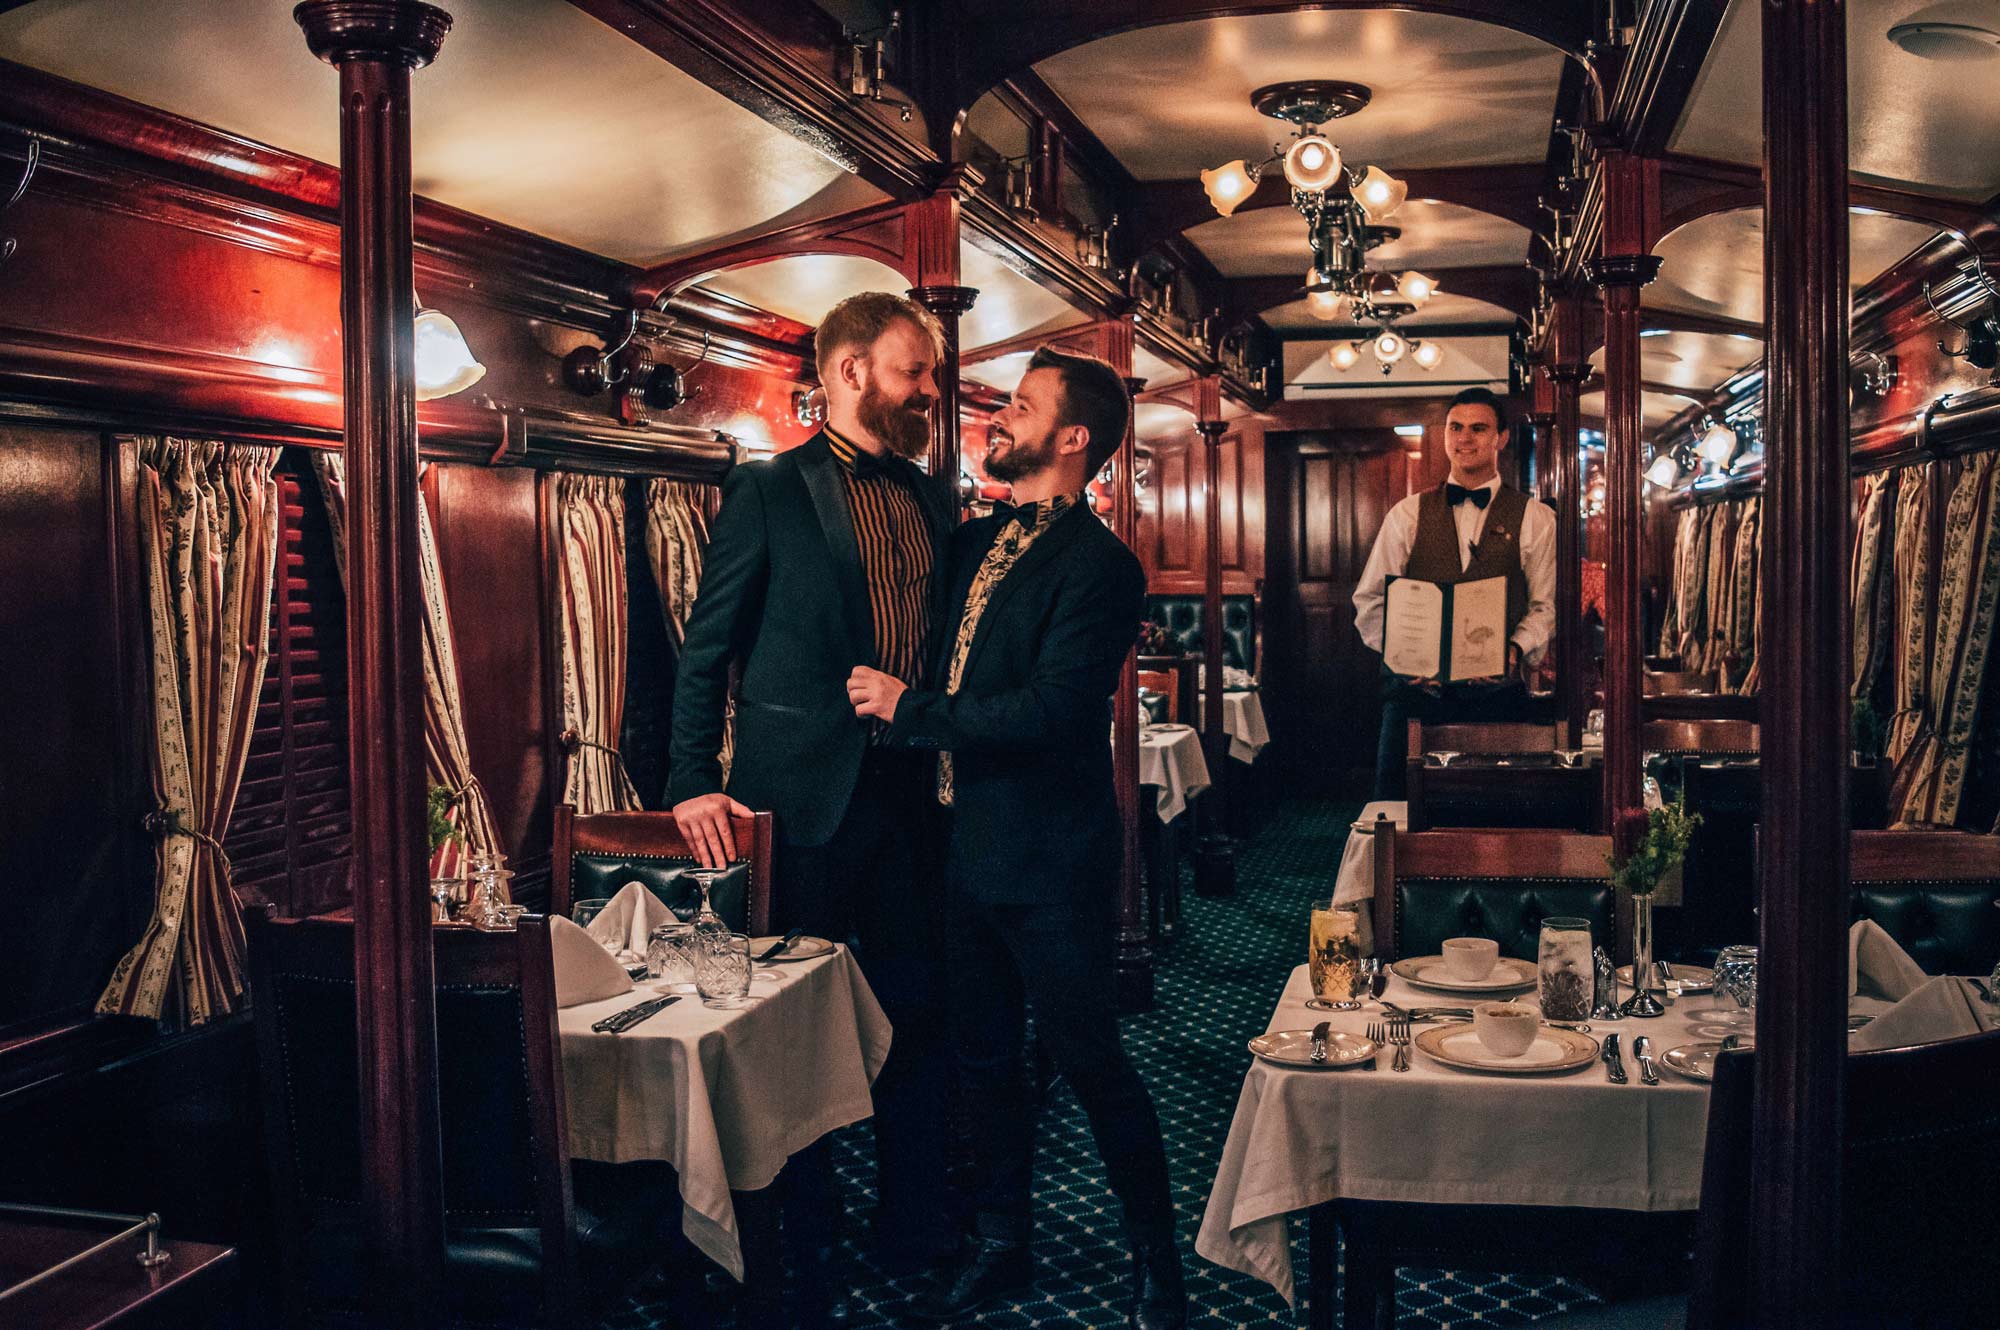 Southern Africa Train Safari with Rovos Rail Jacket and (bow) tie for the dining car with a daily 5-course dinner menu (vegetarian friendly) © Coupleofmen.com